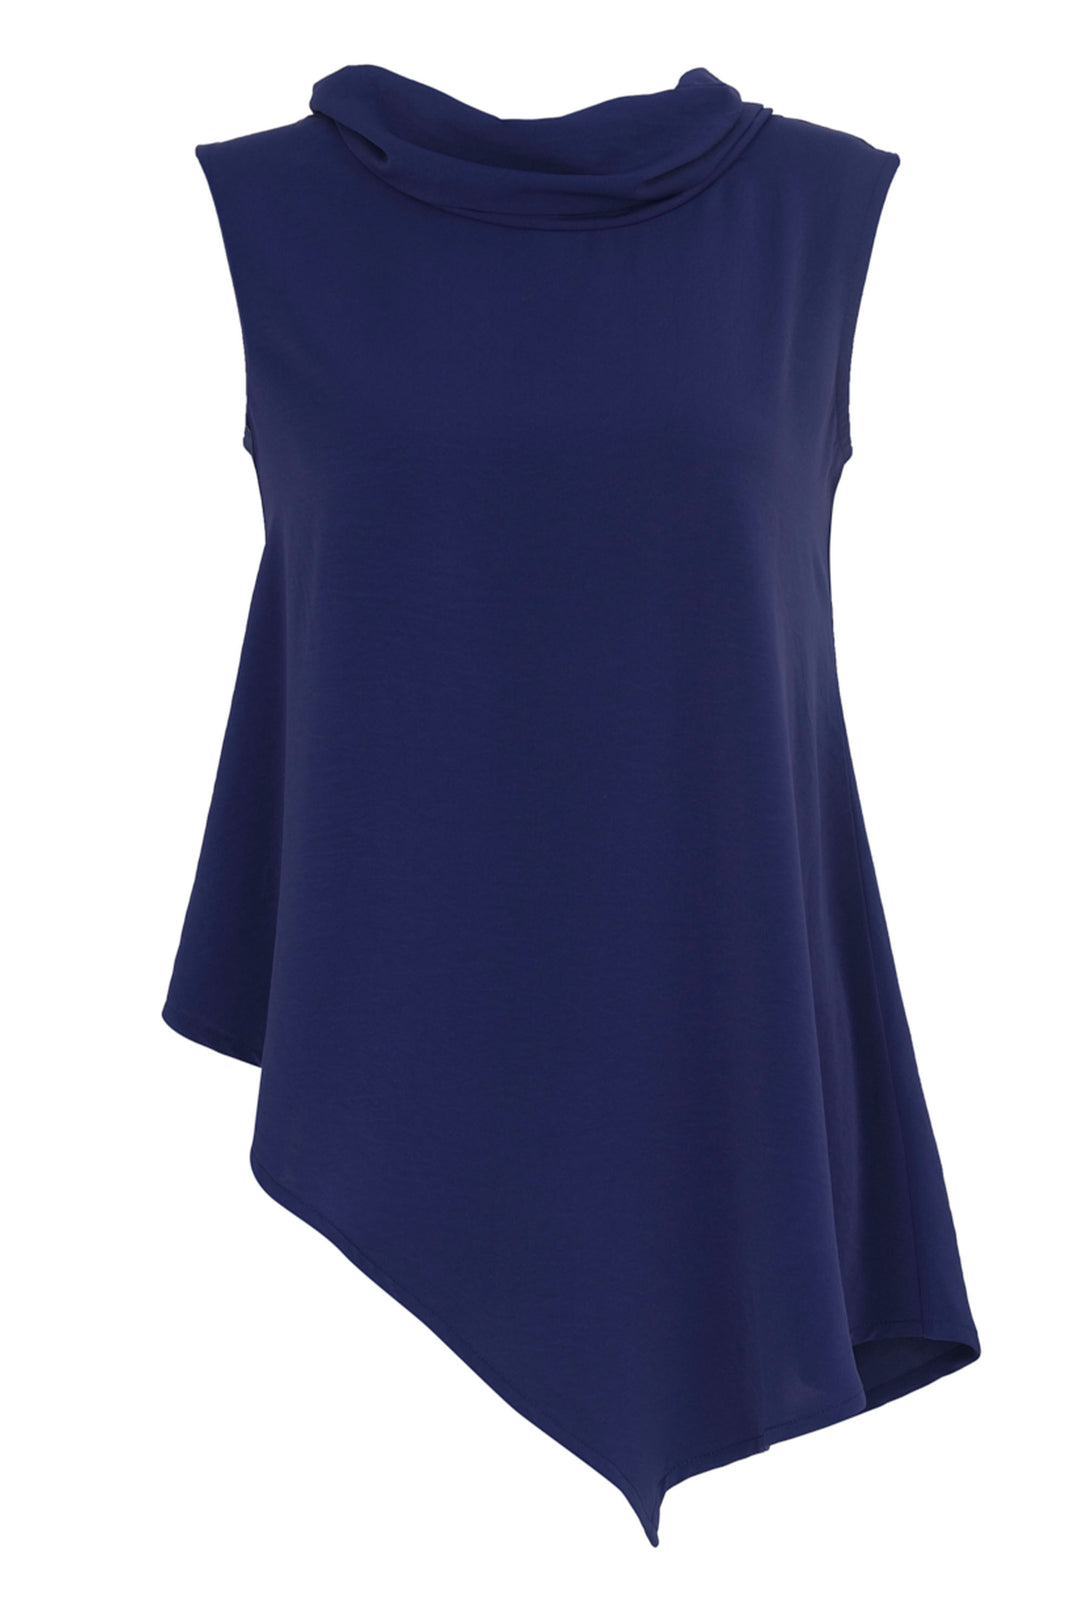 Ever Sassy Spring 2024 This tunic features a cowl or mock neck, sleek sleeveless design and an asymmetrical pointed front hem. 